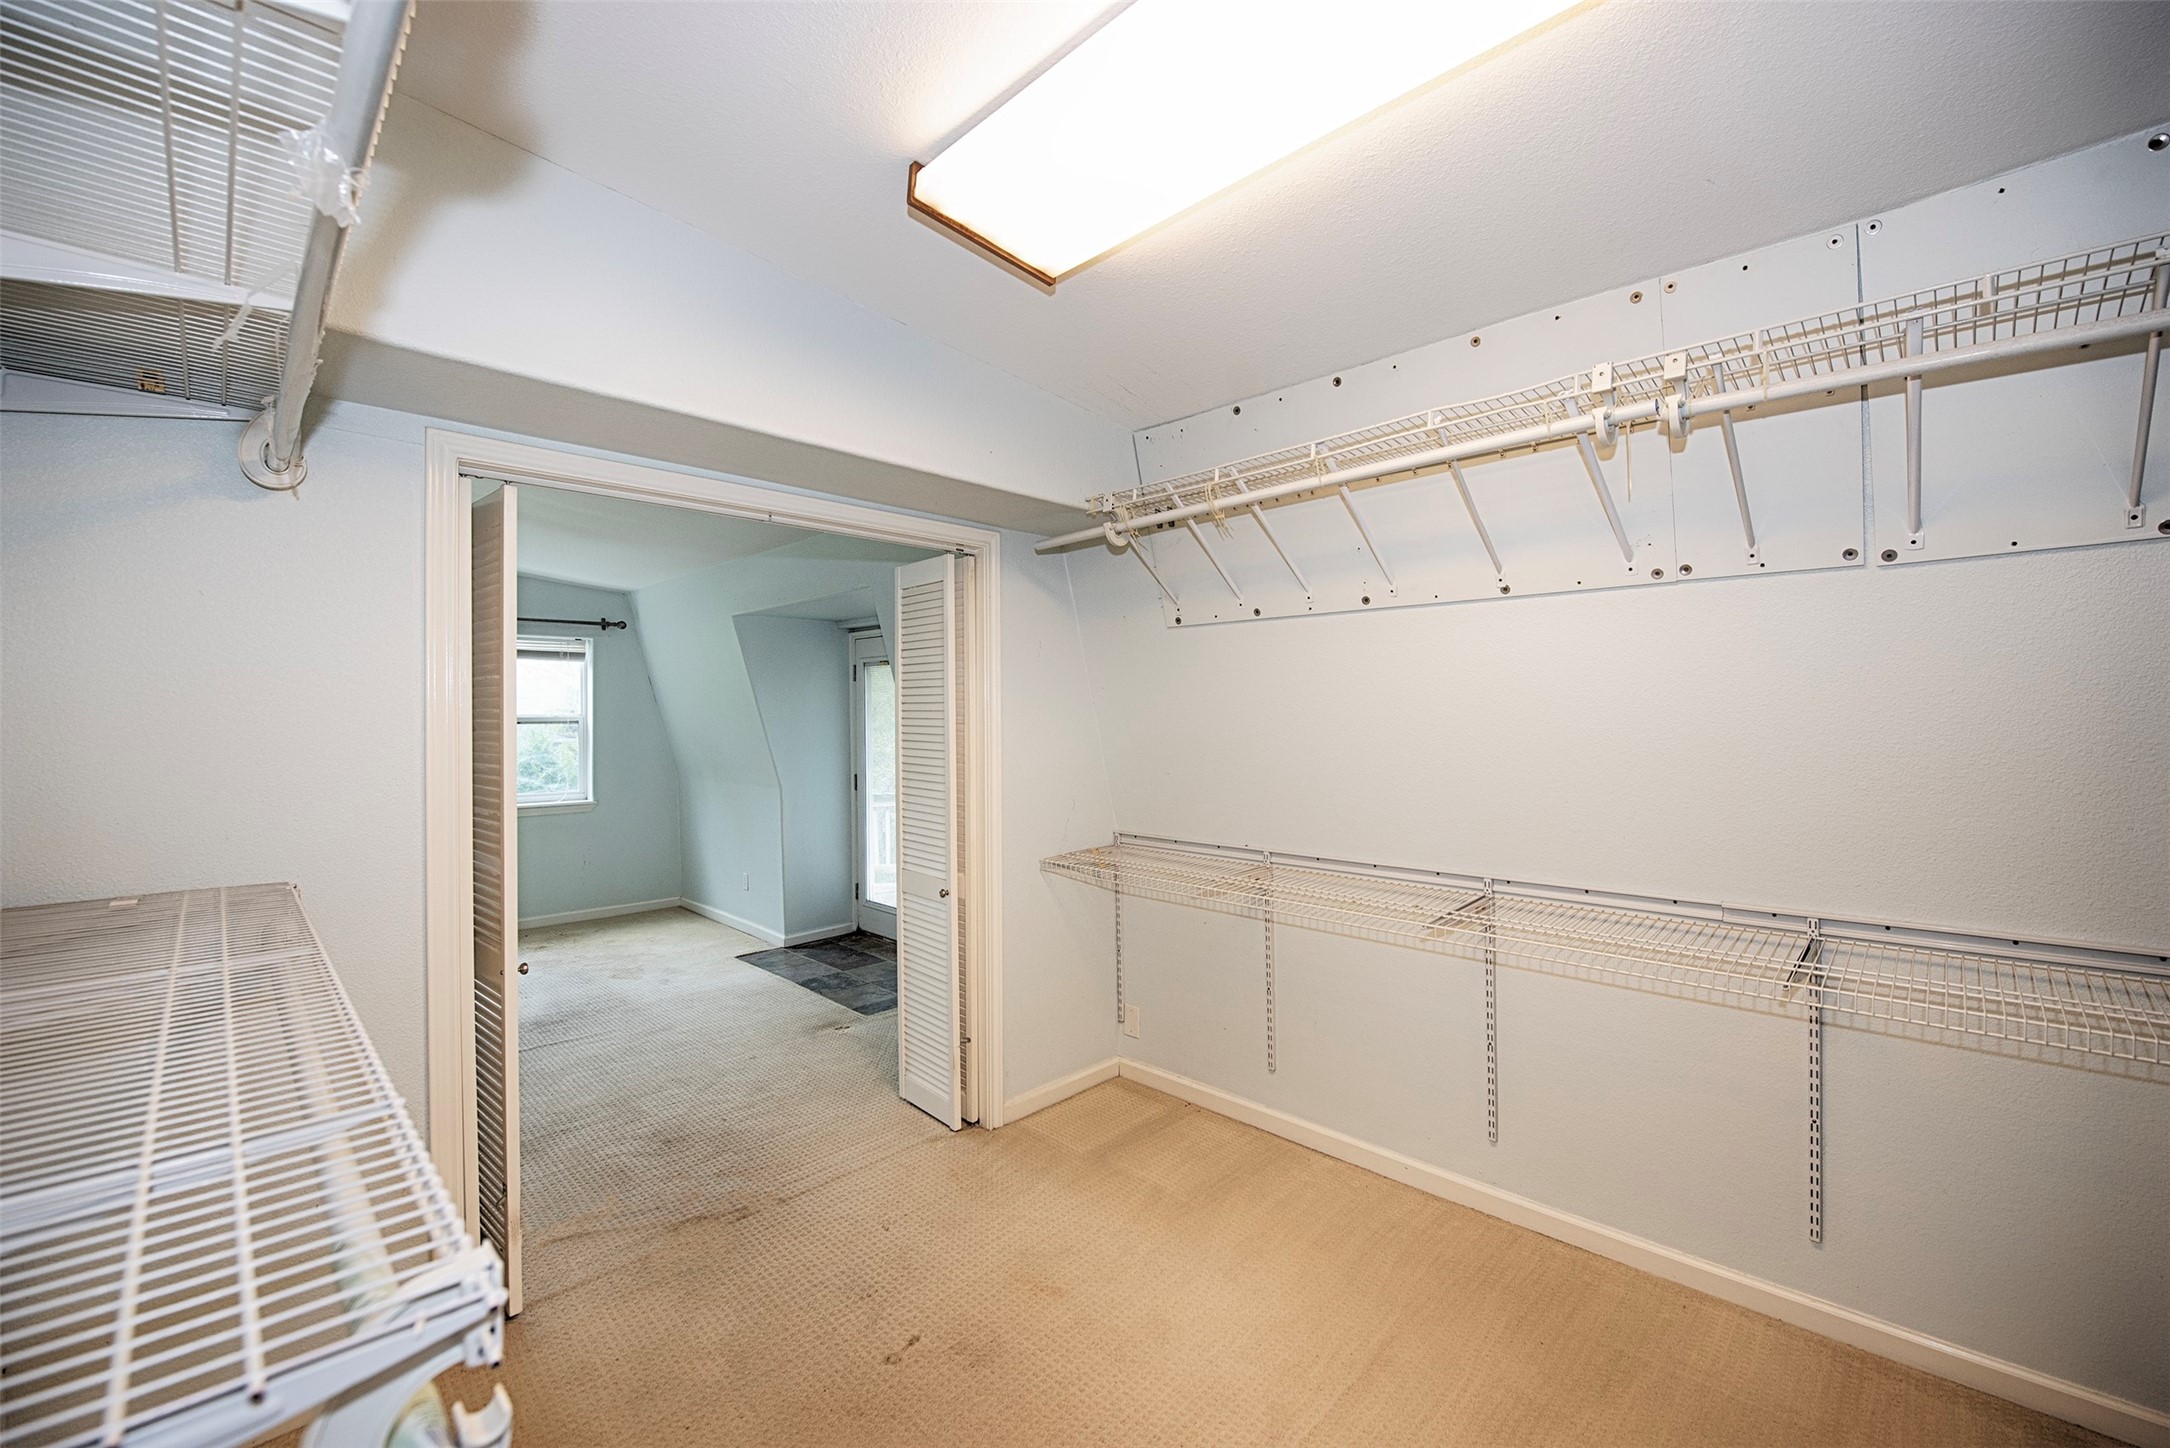 A view of the closet space with sliding doors the primary bedroom. - If you have additional questions regarding 1028 N Country Club Drive  in Shoreacres or would like to tour the property with us call 800-660-1022 and reference MLS# 5487846.